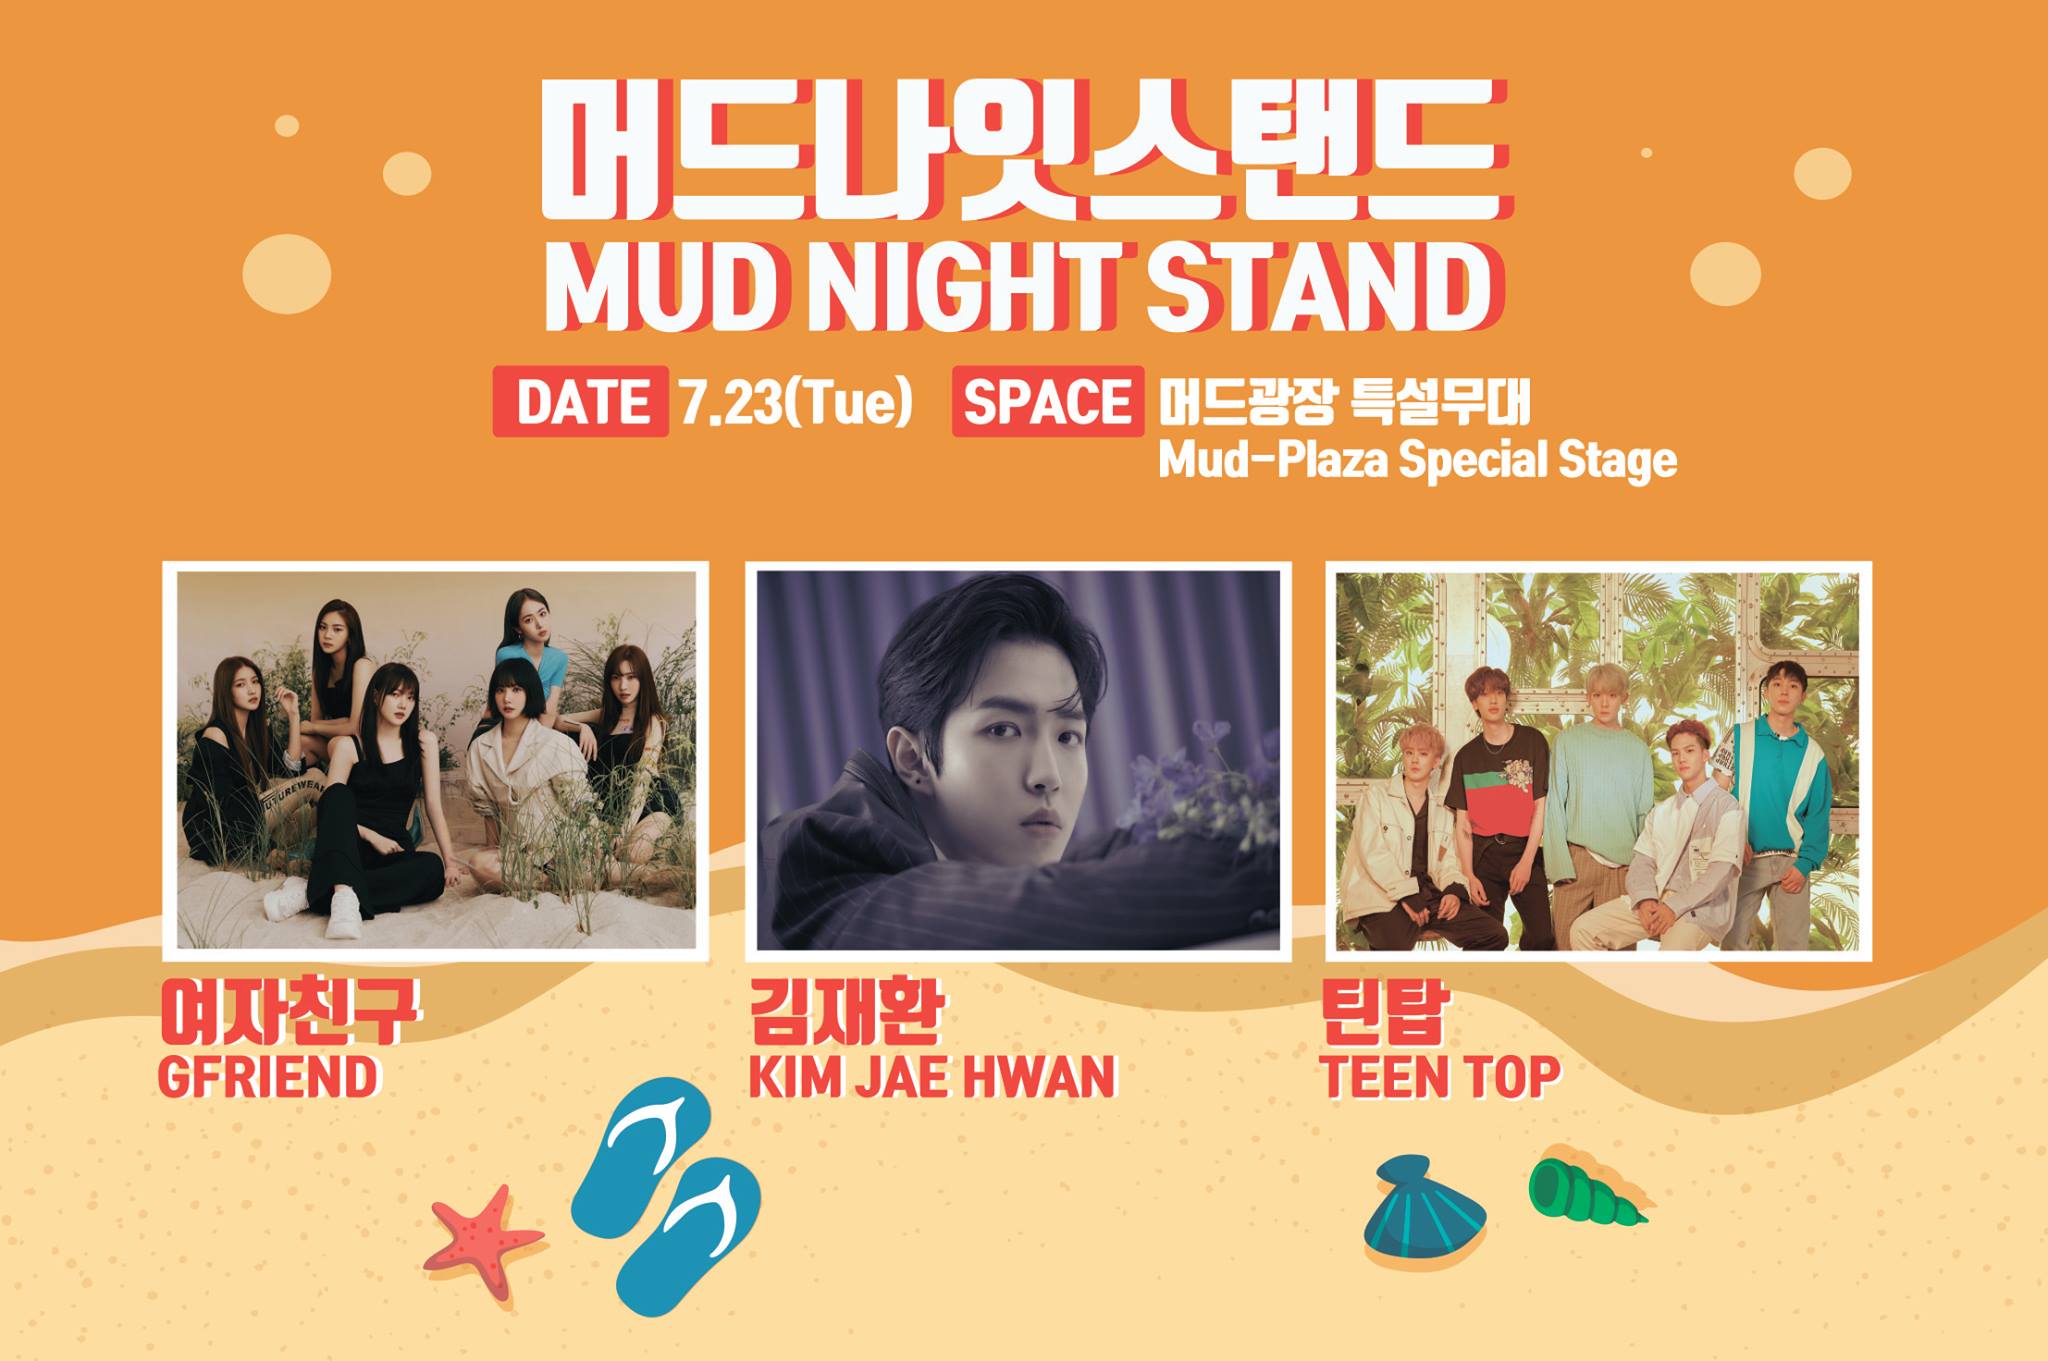 Mudnight stand with GFRIEND, Kim Jae Hwan and Teen Top